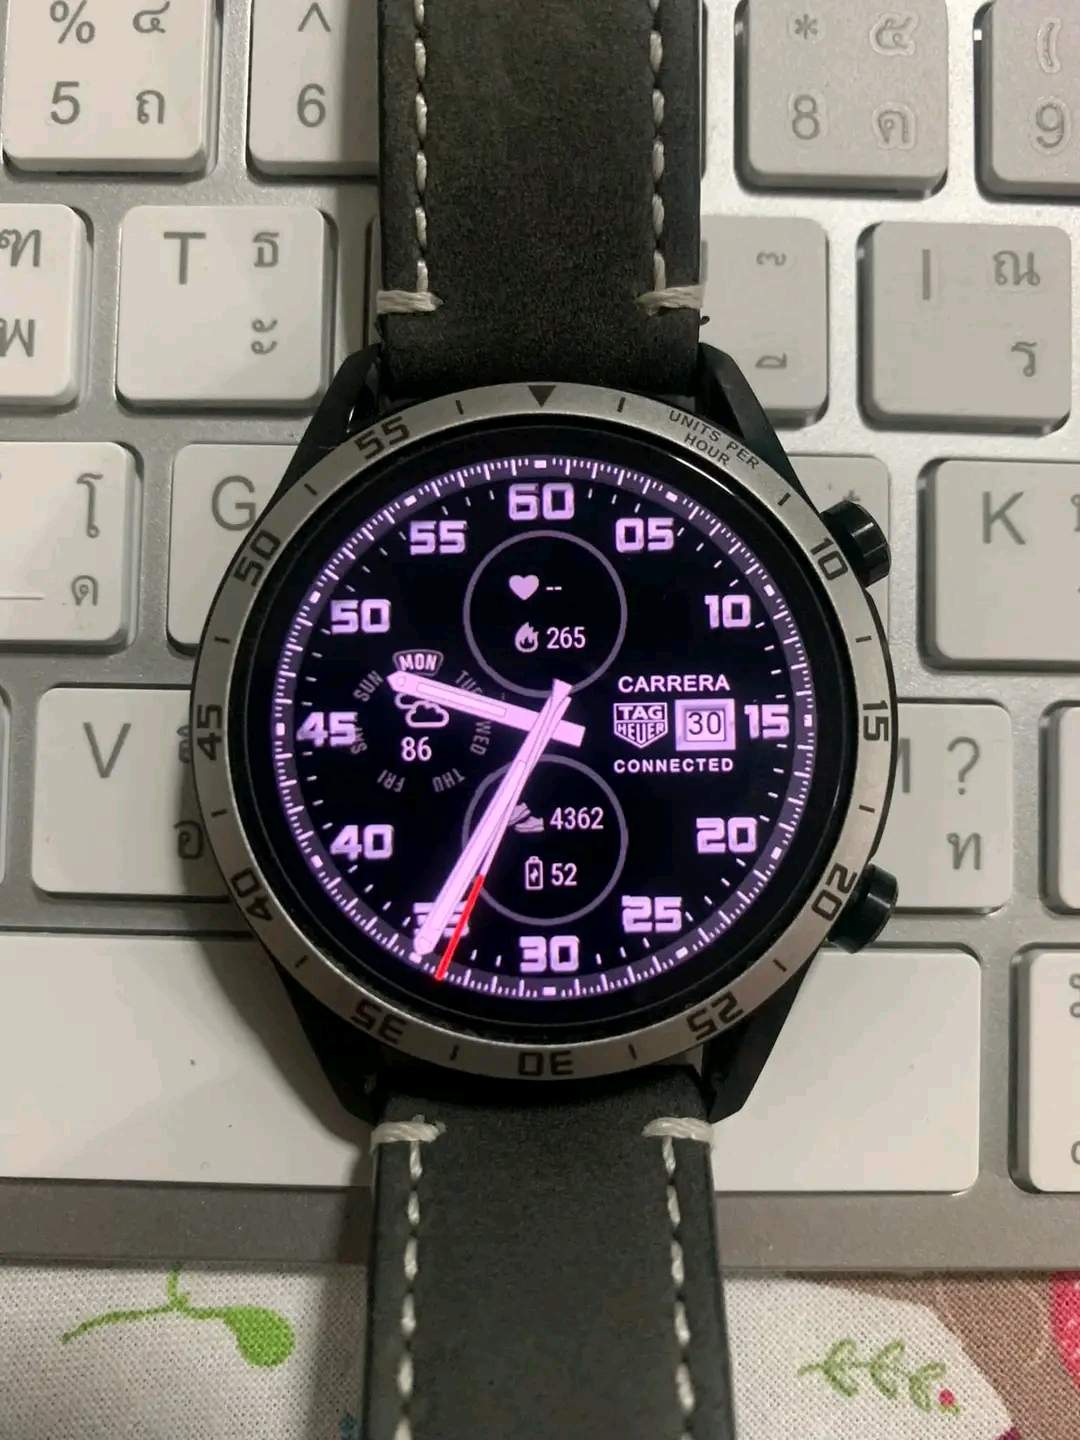 Carrera tag heuer reloaded realistic watch face theme